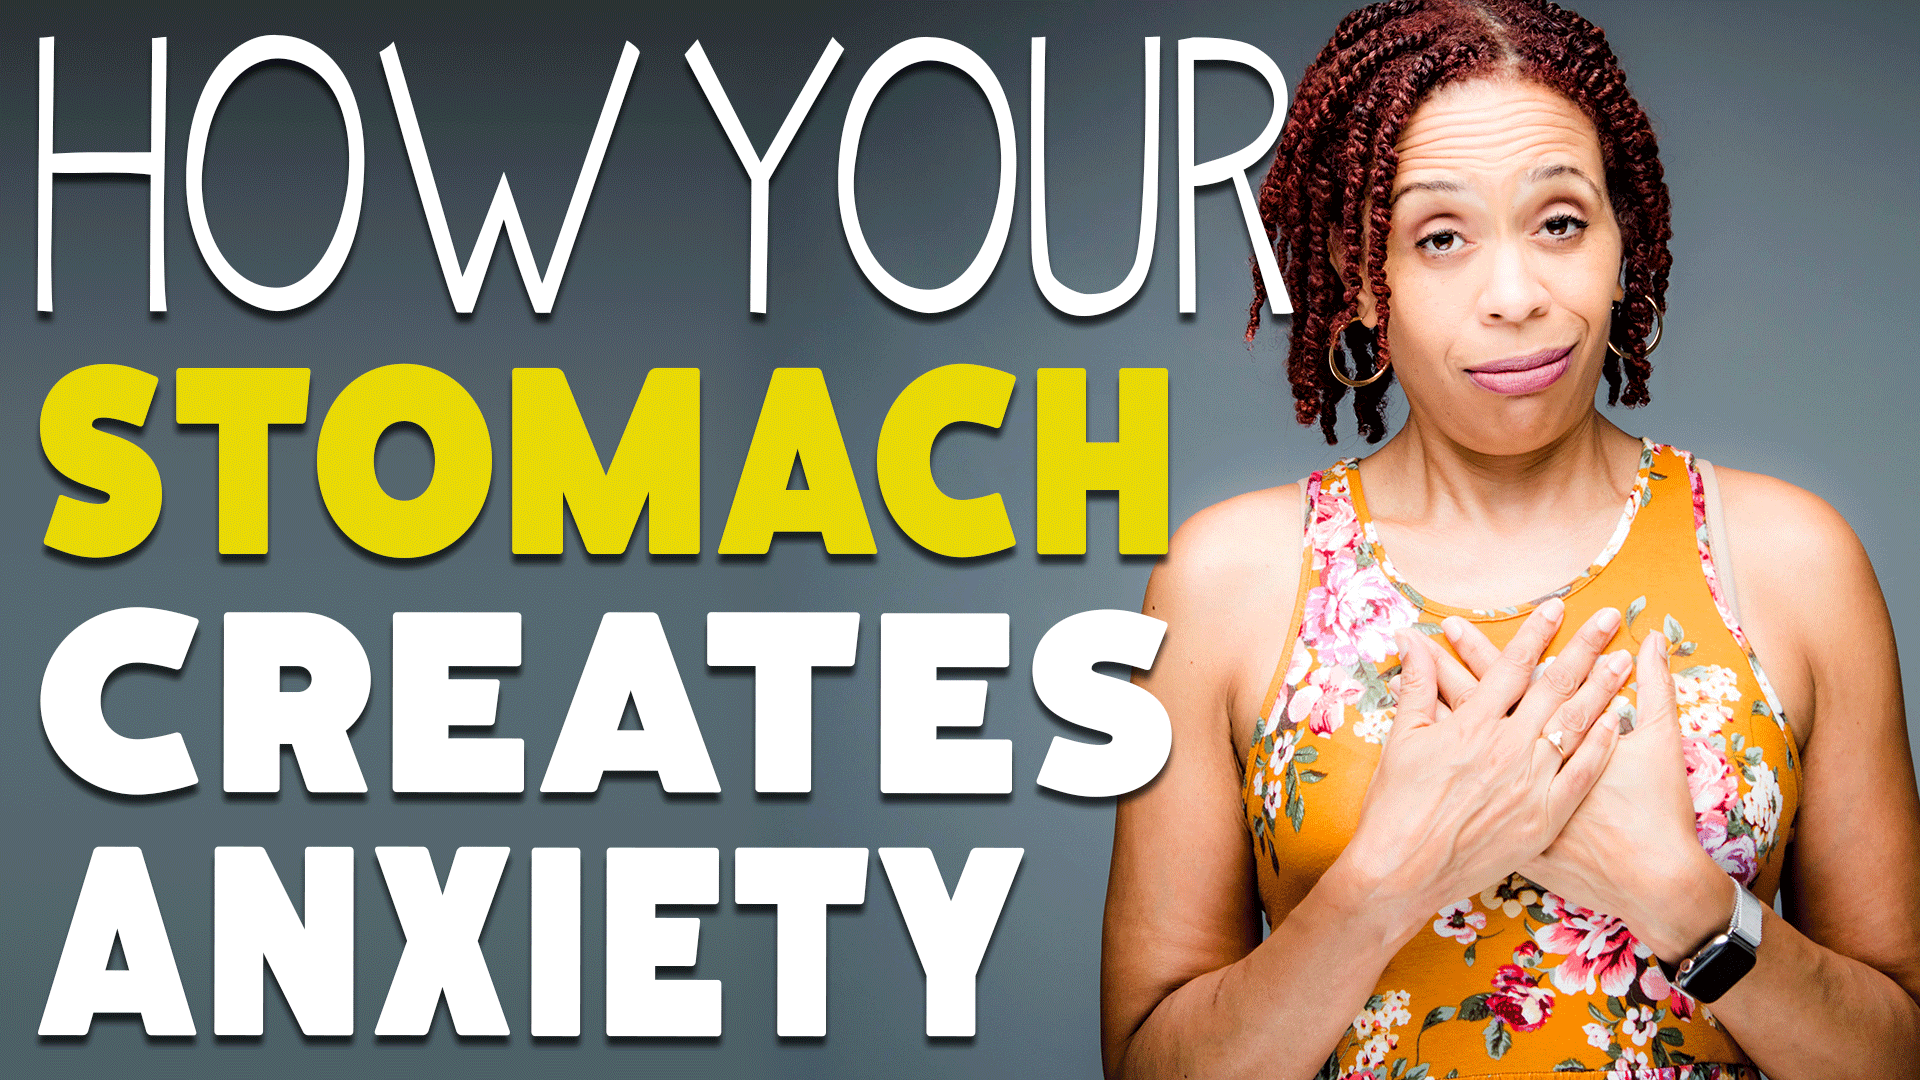 The Connection Between Anxiety and Stomach Problems